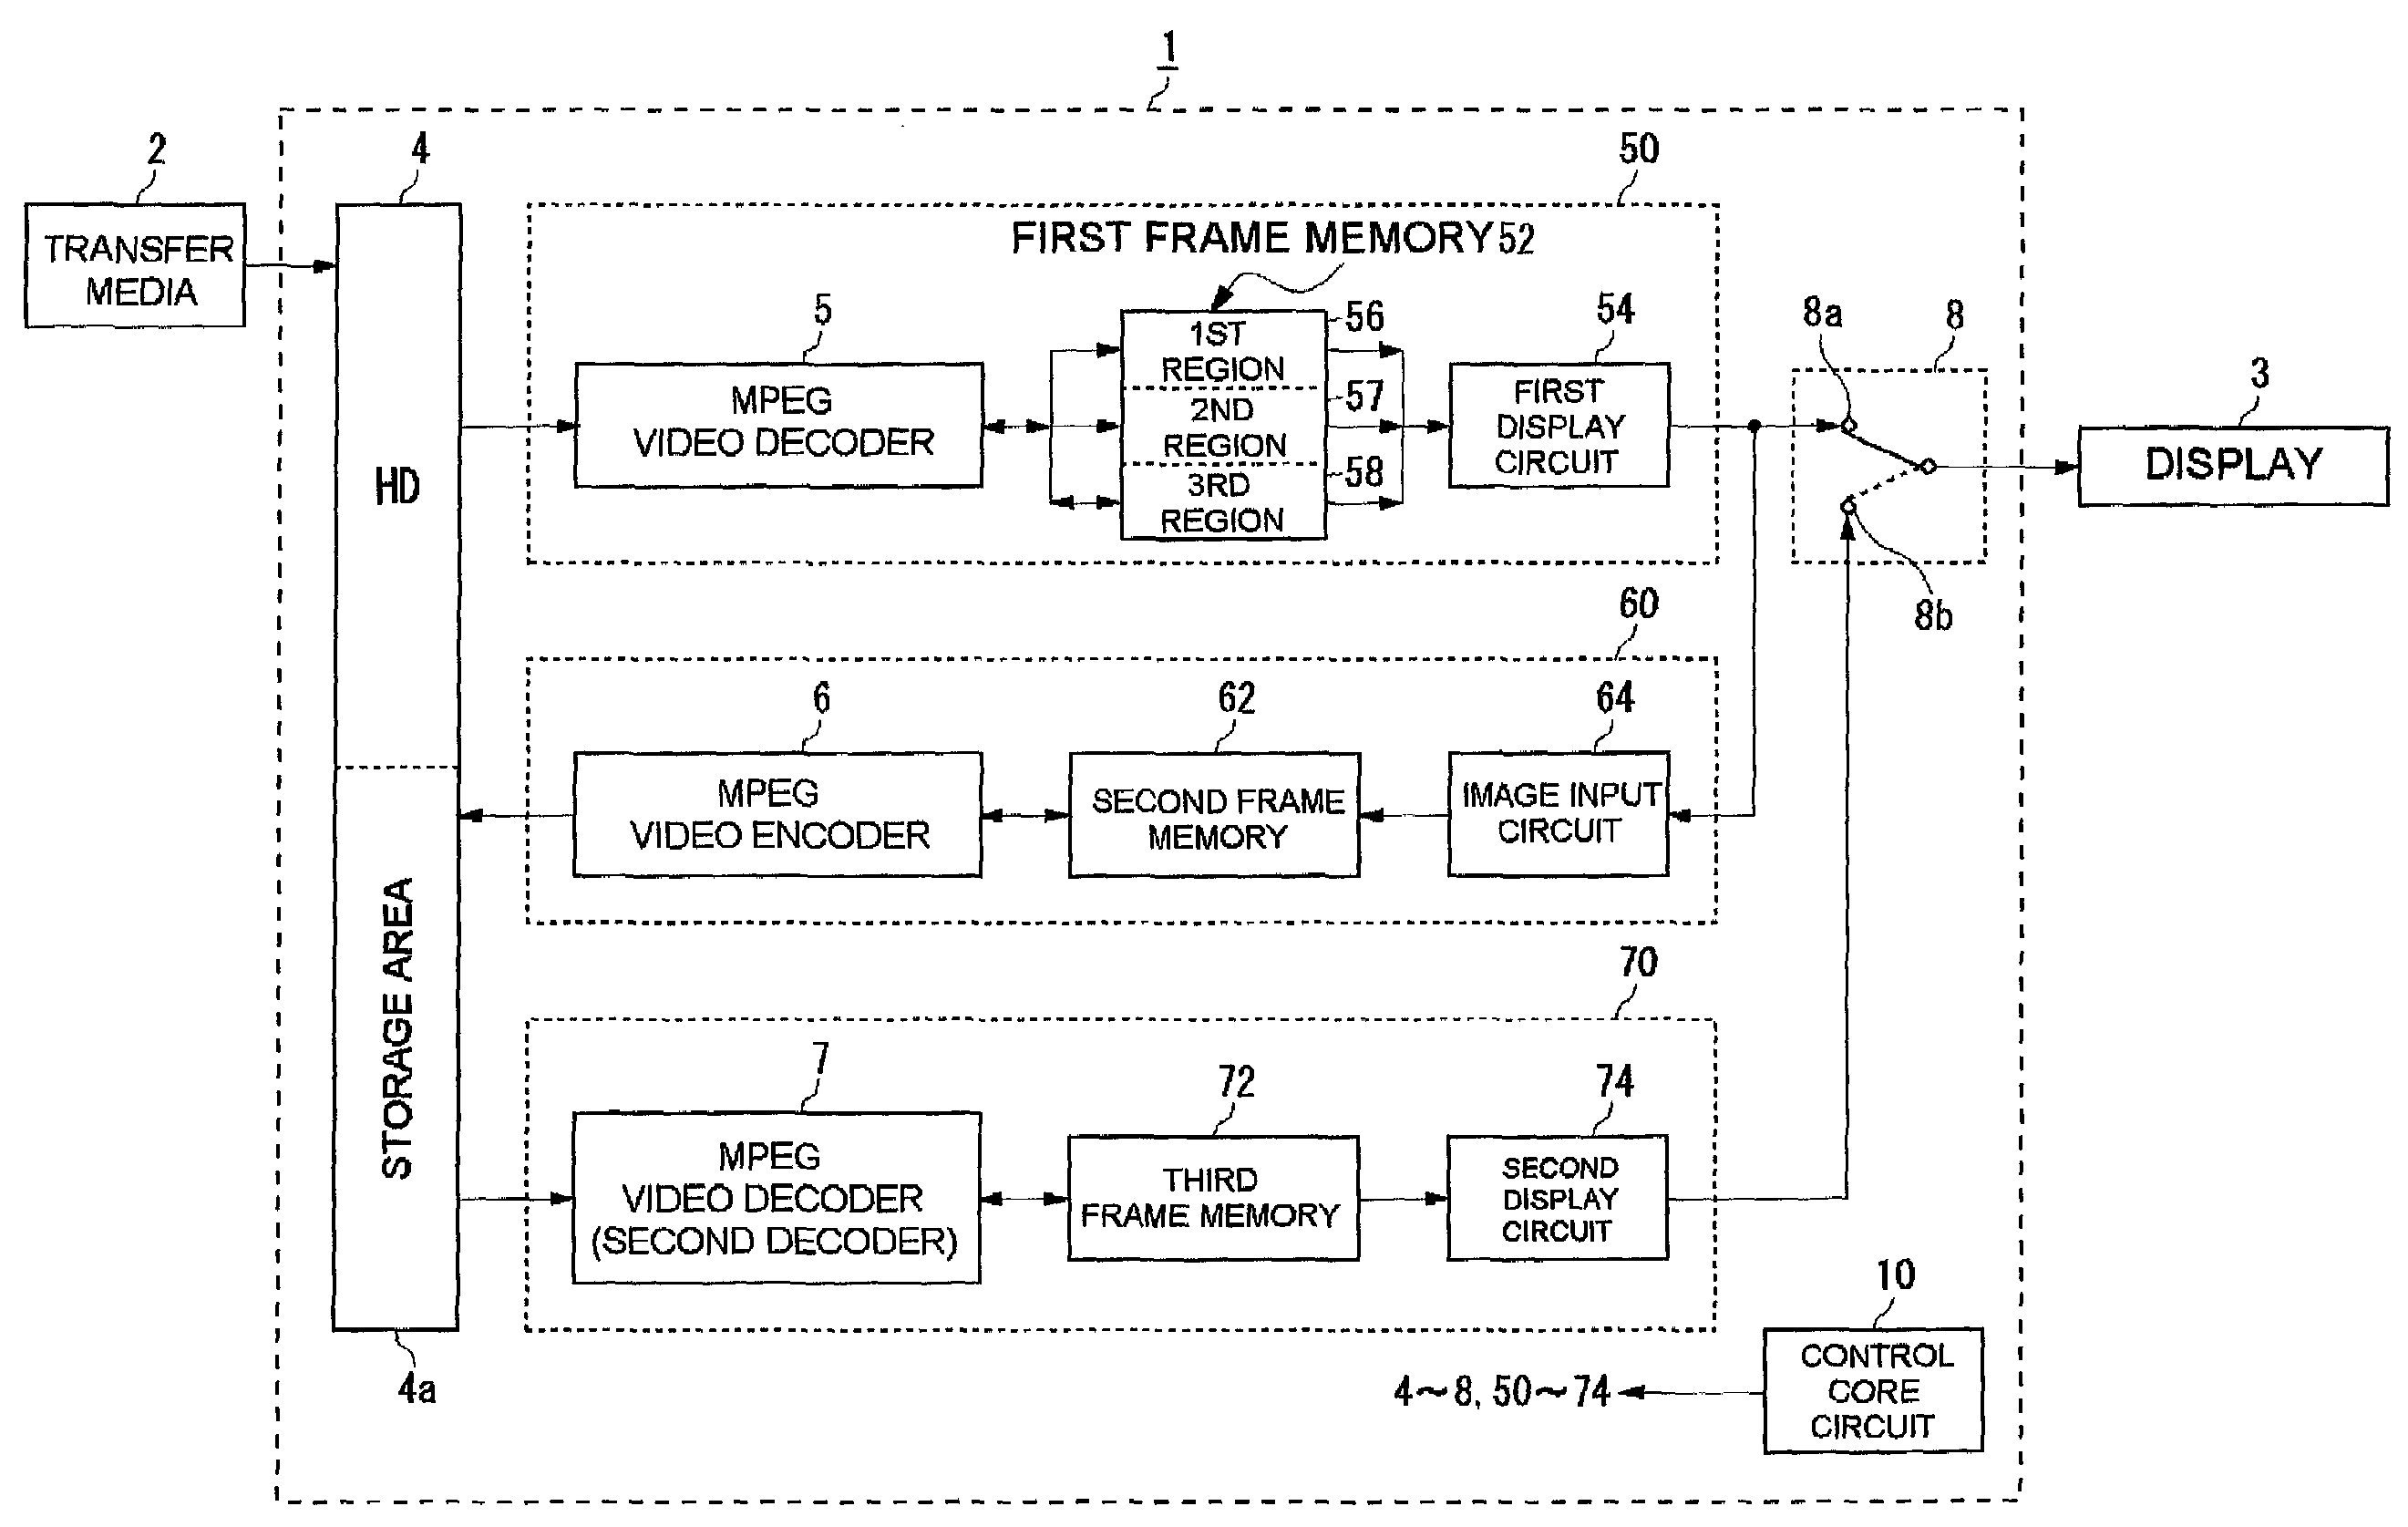 Image processing using shared frame memory